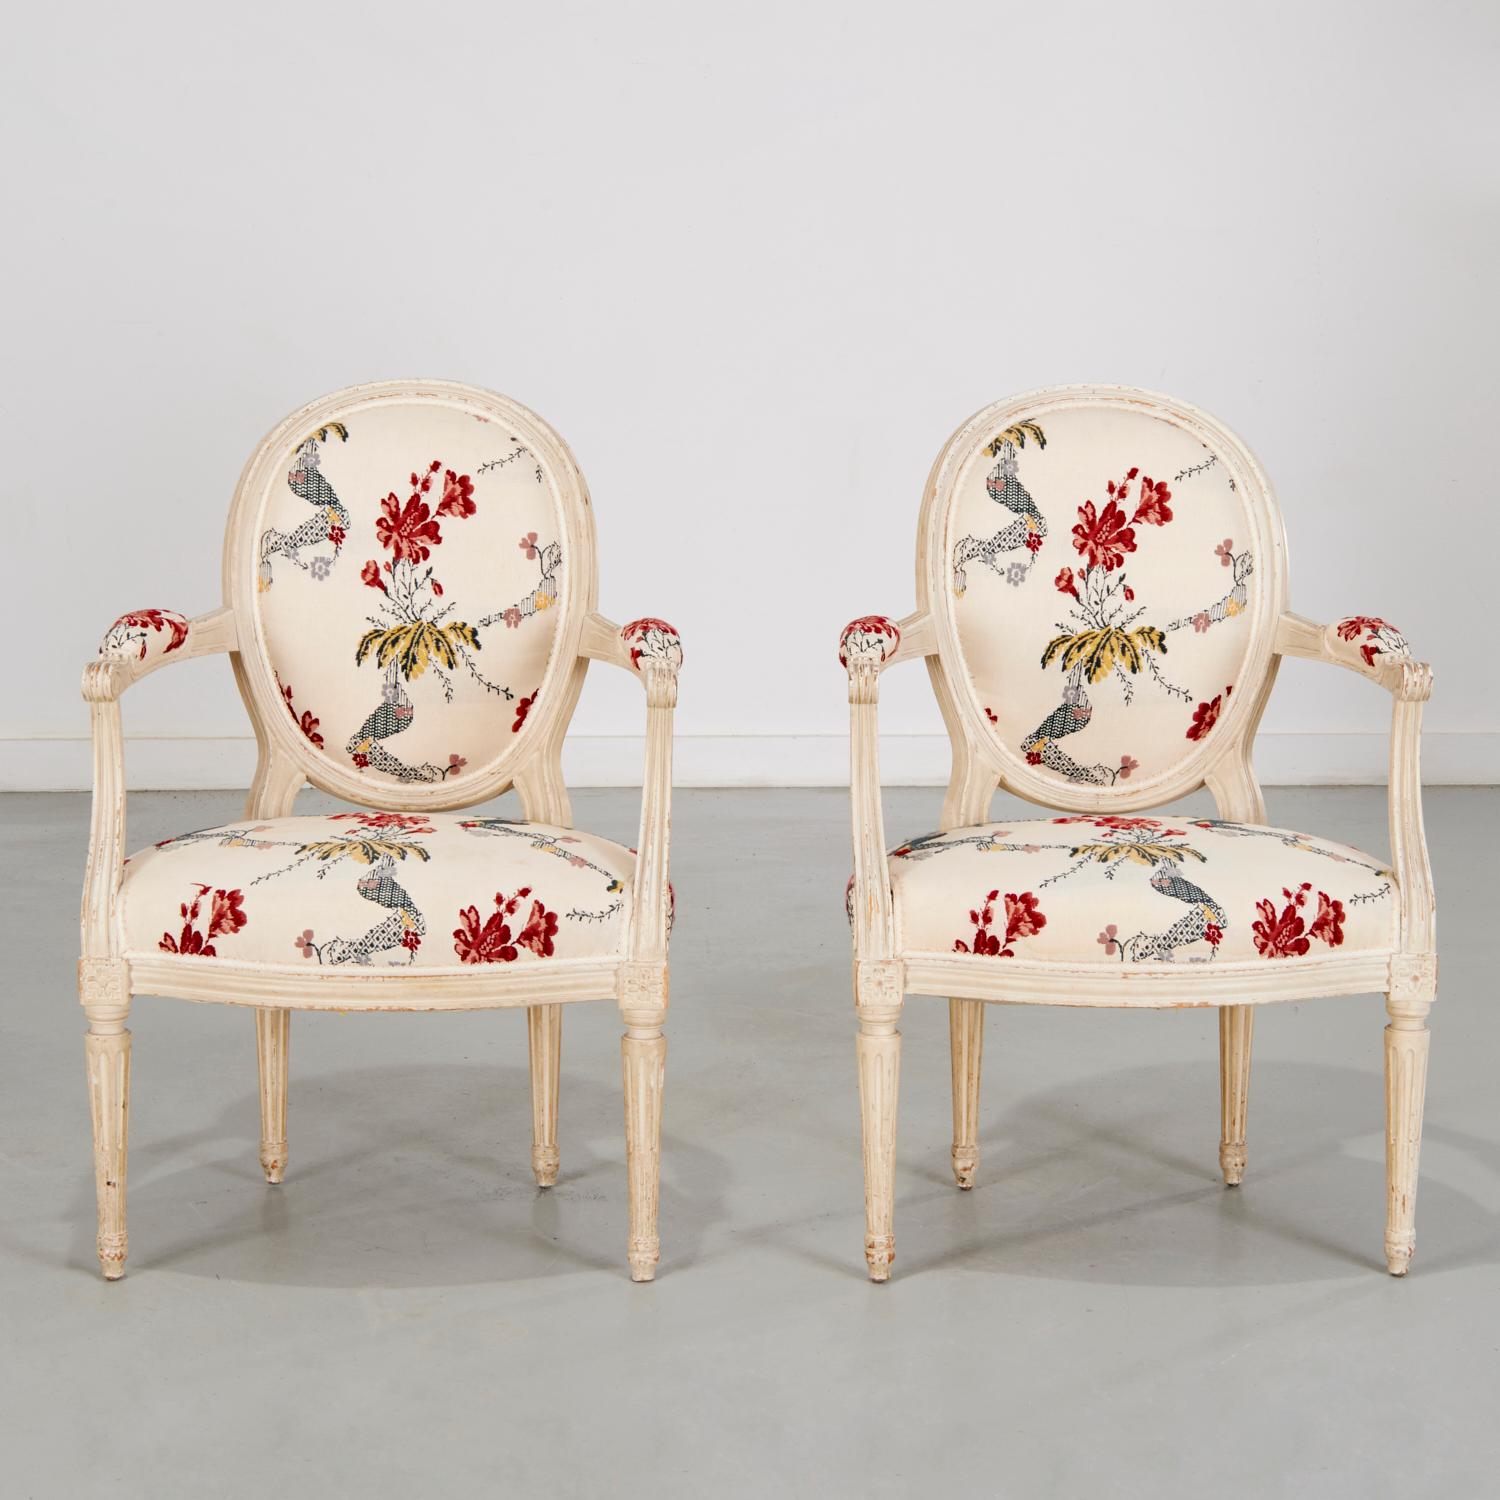 Antique Pair Louis XVI Style Painted Fauteuils w. 20th C. Crewel Work Upholstery For Sale 3